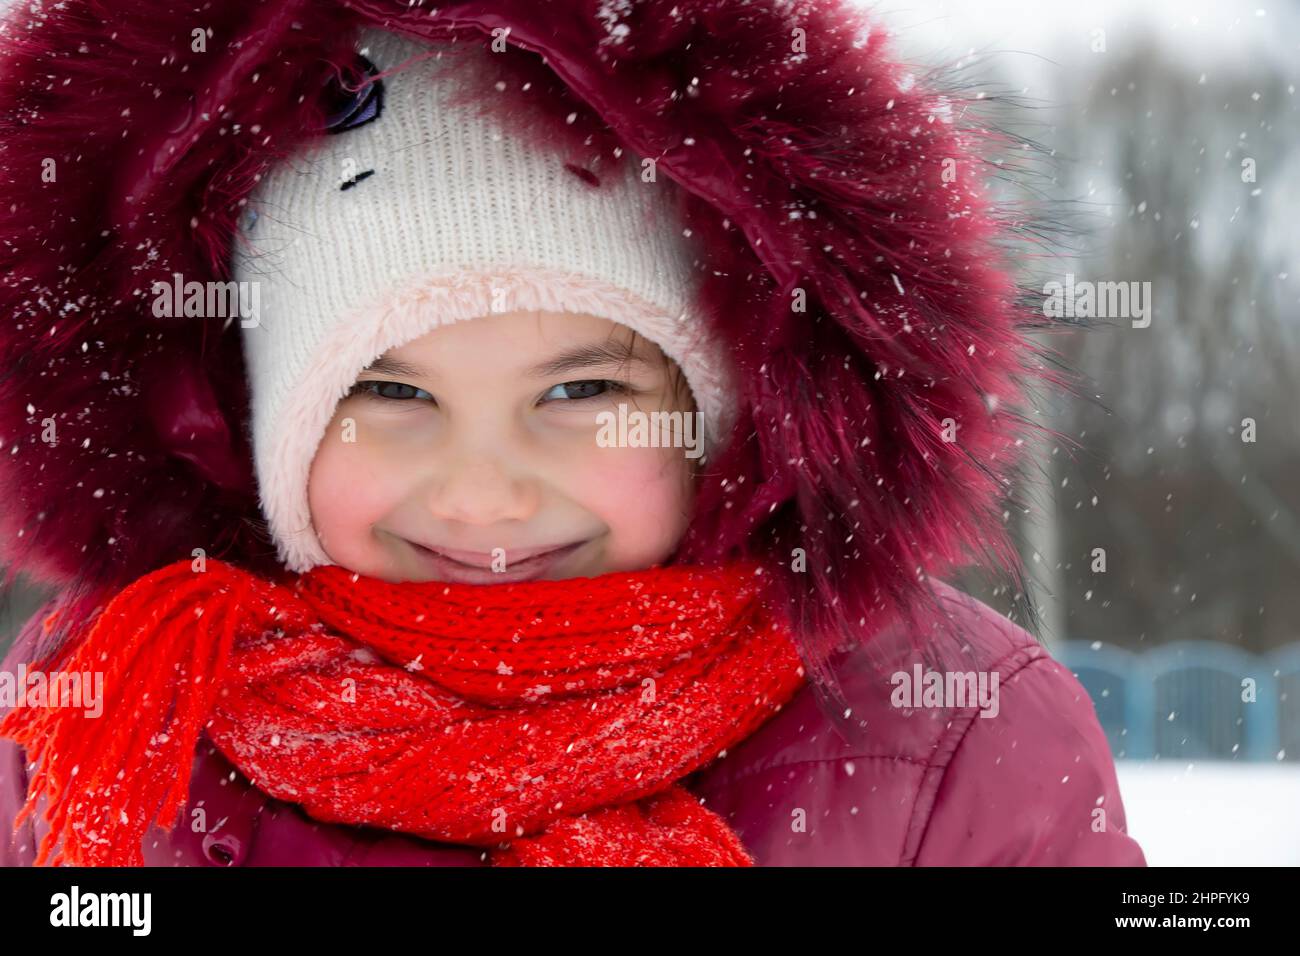 Child in winter. A little girl in a warm hat and hood looks at the camera and smiles. Stock Photo